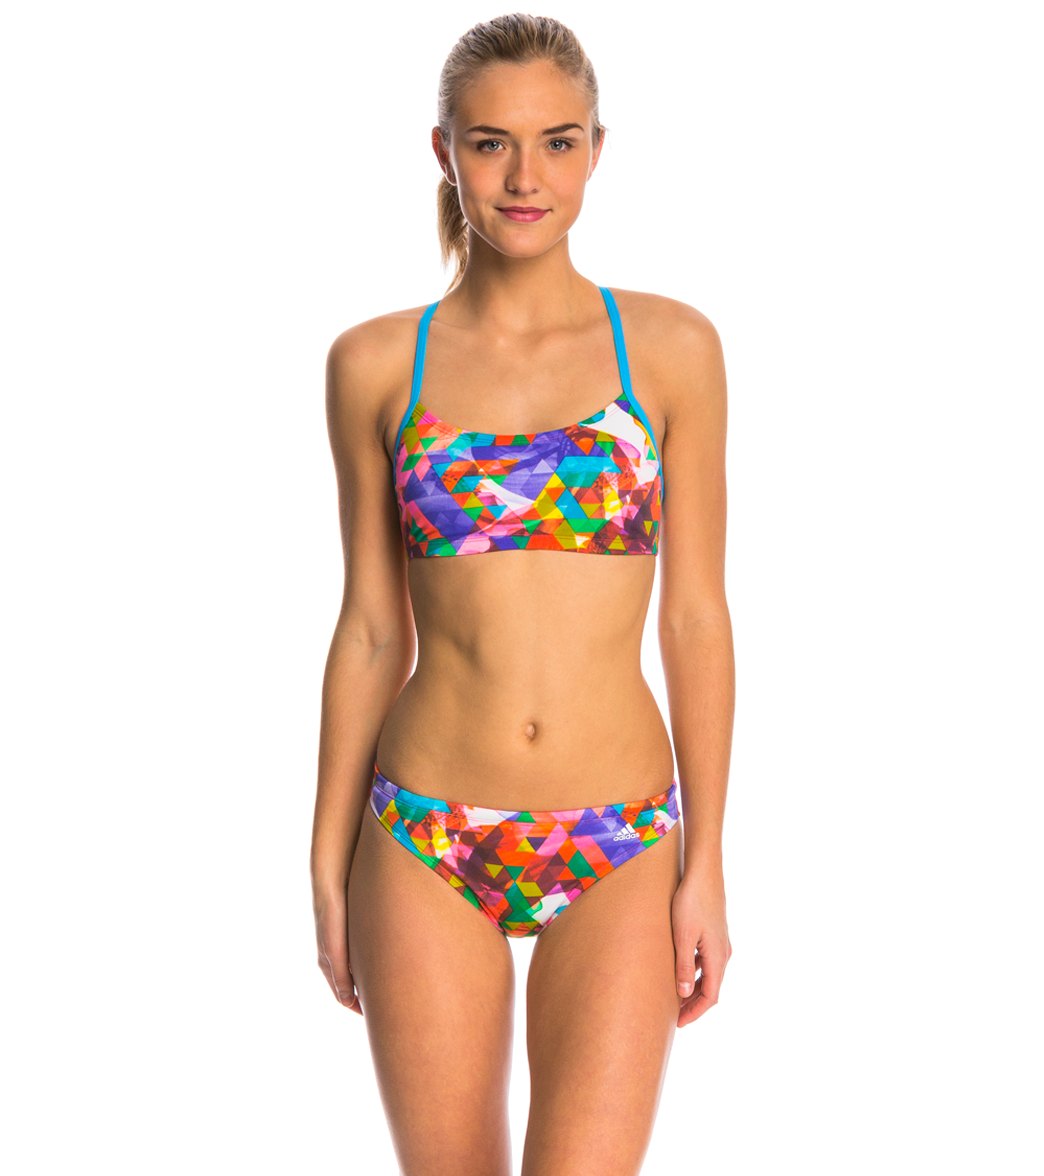 Adidas Women's Layered Floral Scoop Two Piece Swimsuit at SwimOutlet.com